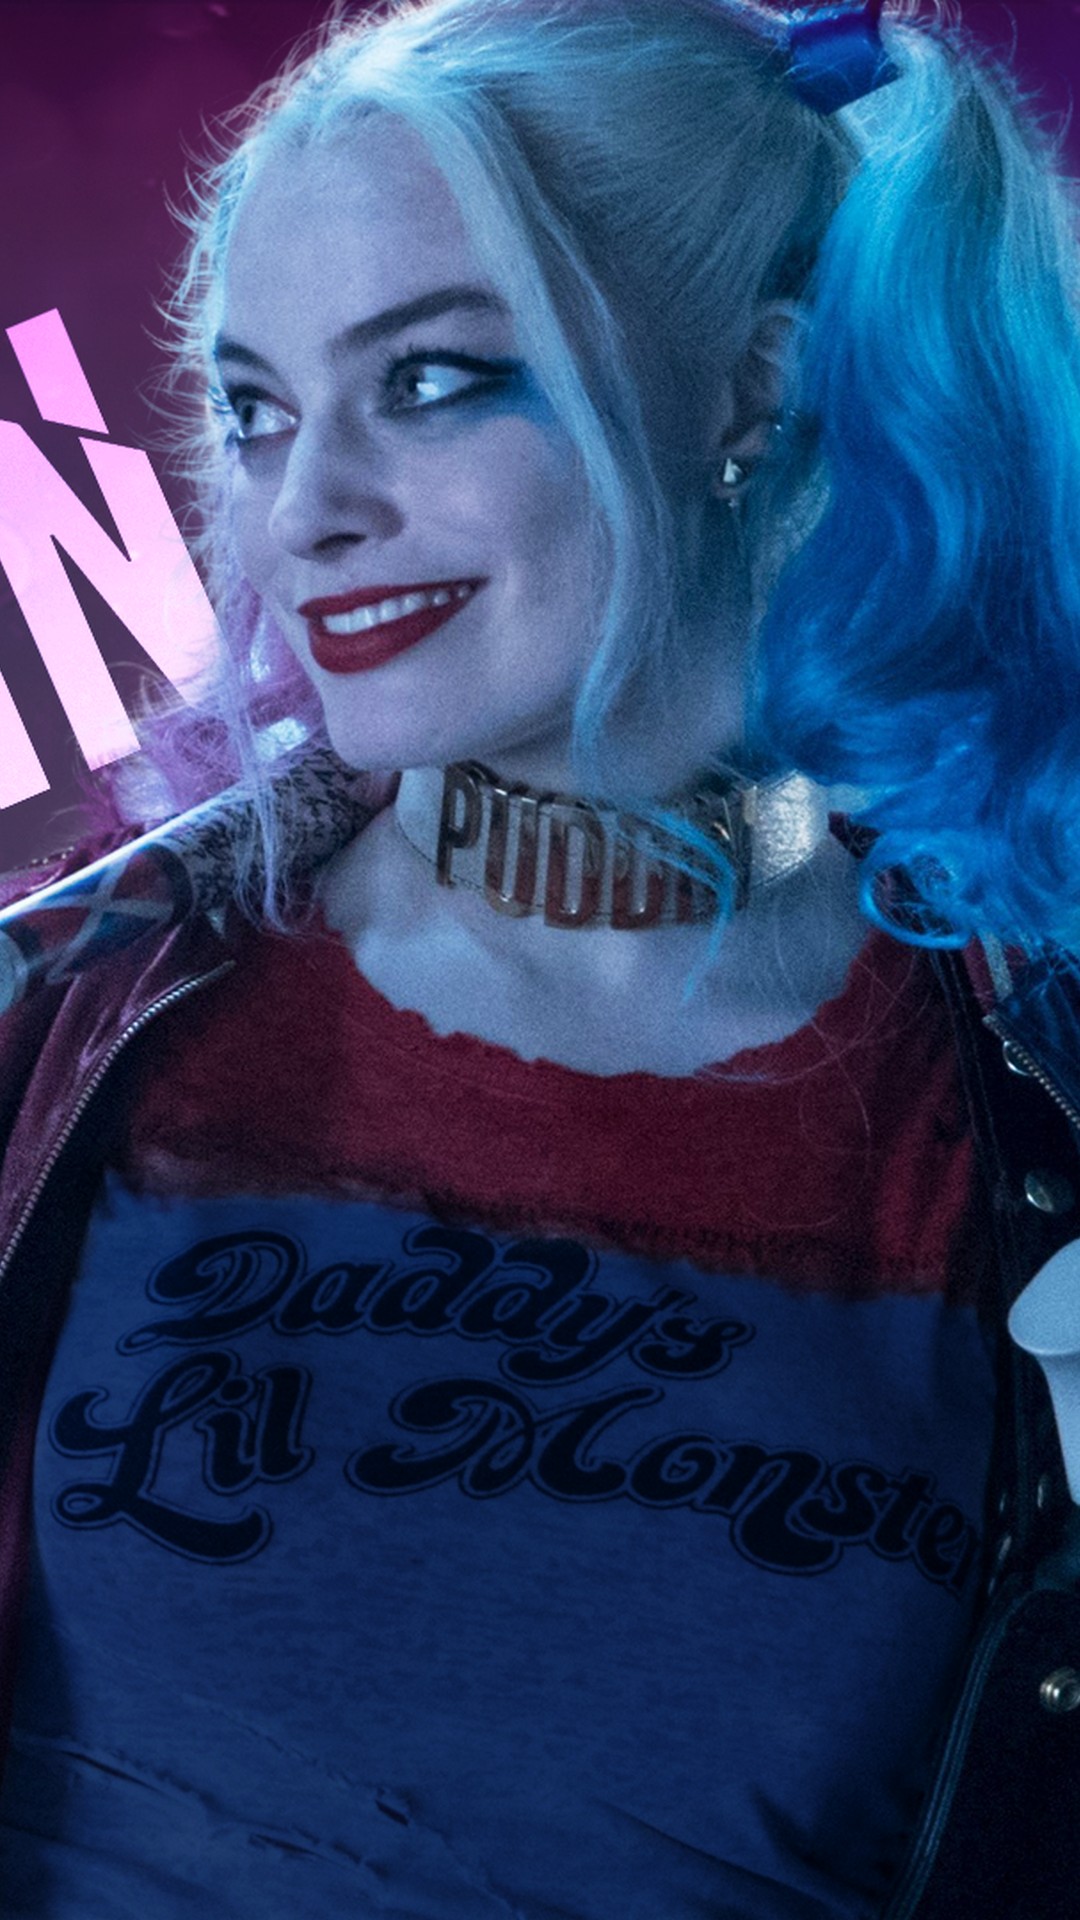 Harley Quinn Wallpaper For iPhone with image resolution 1080x1920 pixel. You can make this wallpaper for your iPhone 5, 6, 7, 8, X backgrounds, Mobile Screensaver, or iPad Lock Screen